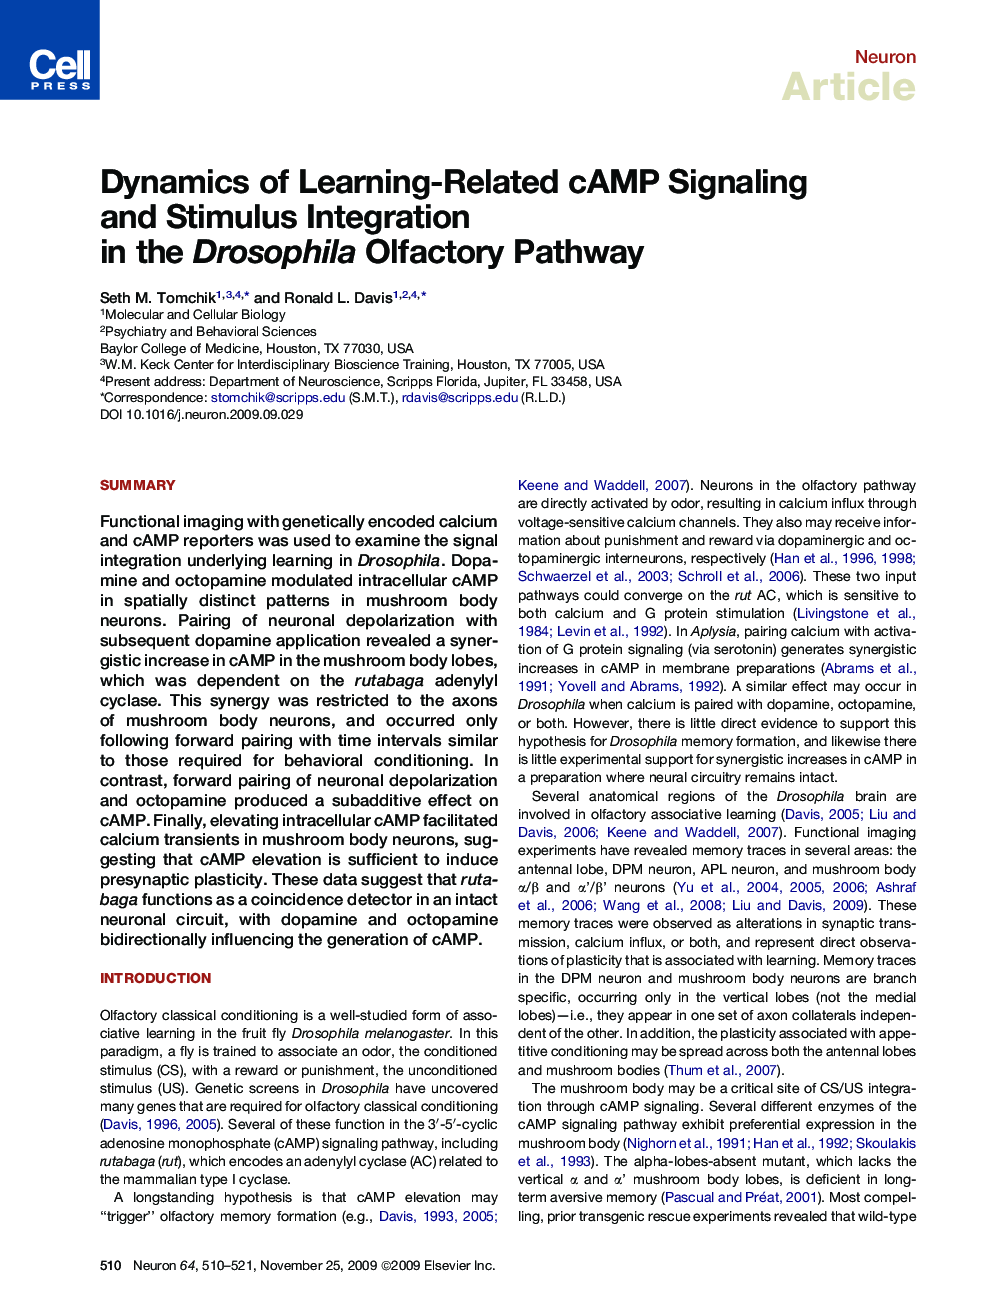 Dynamics of Learning-Related cAMP Signaling and Stimulus Integration in the Drosophila Olfactory Pathway